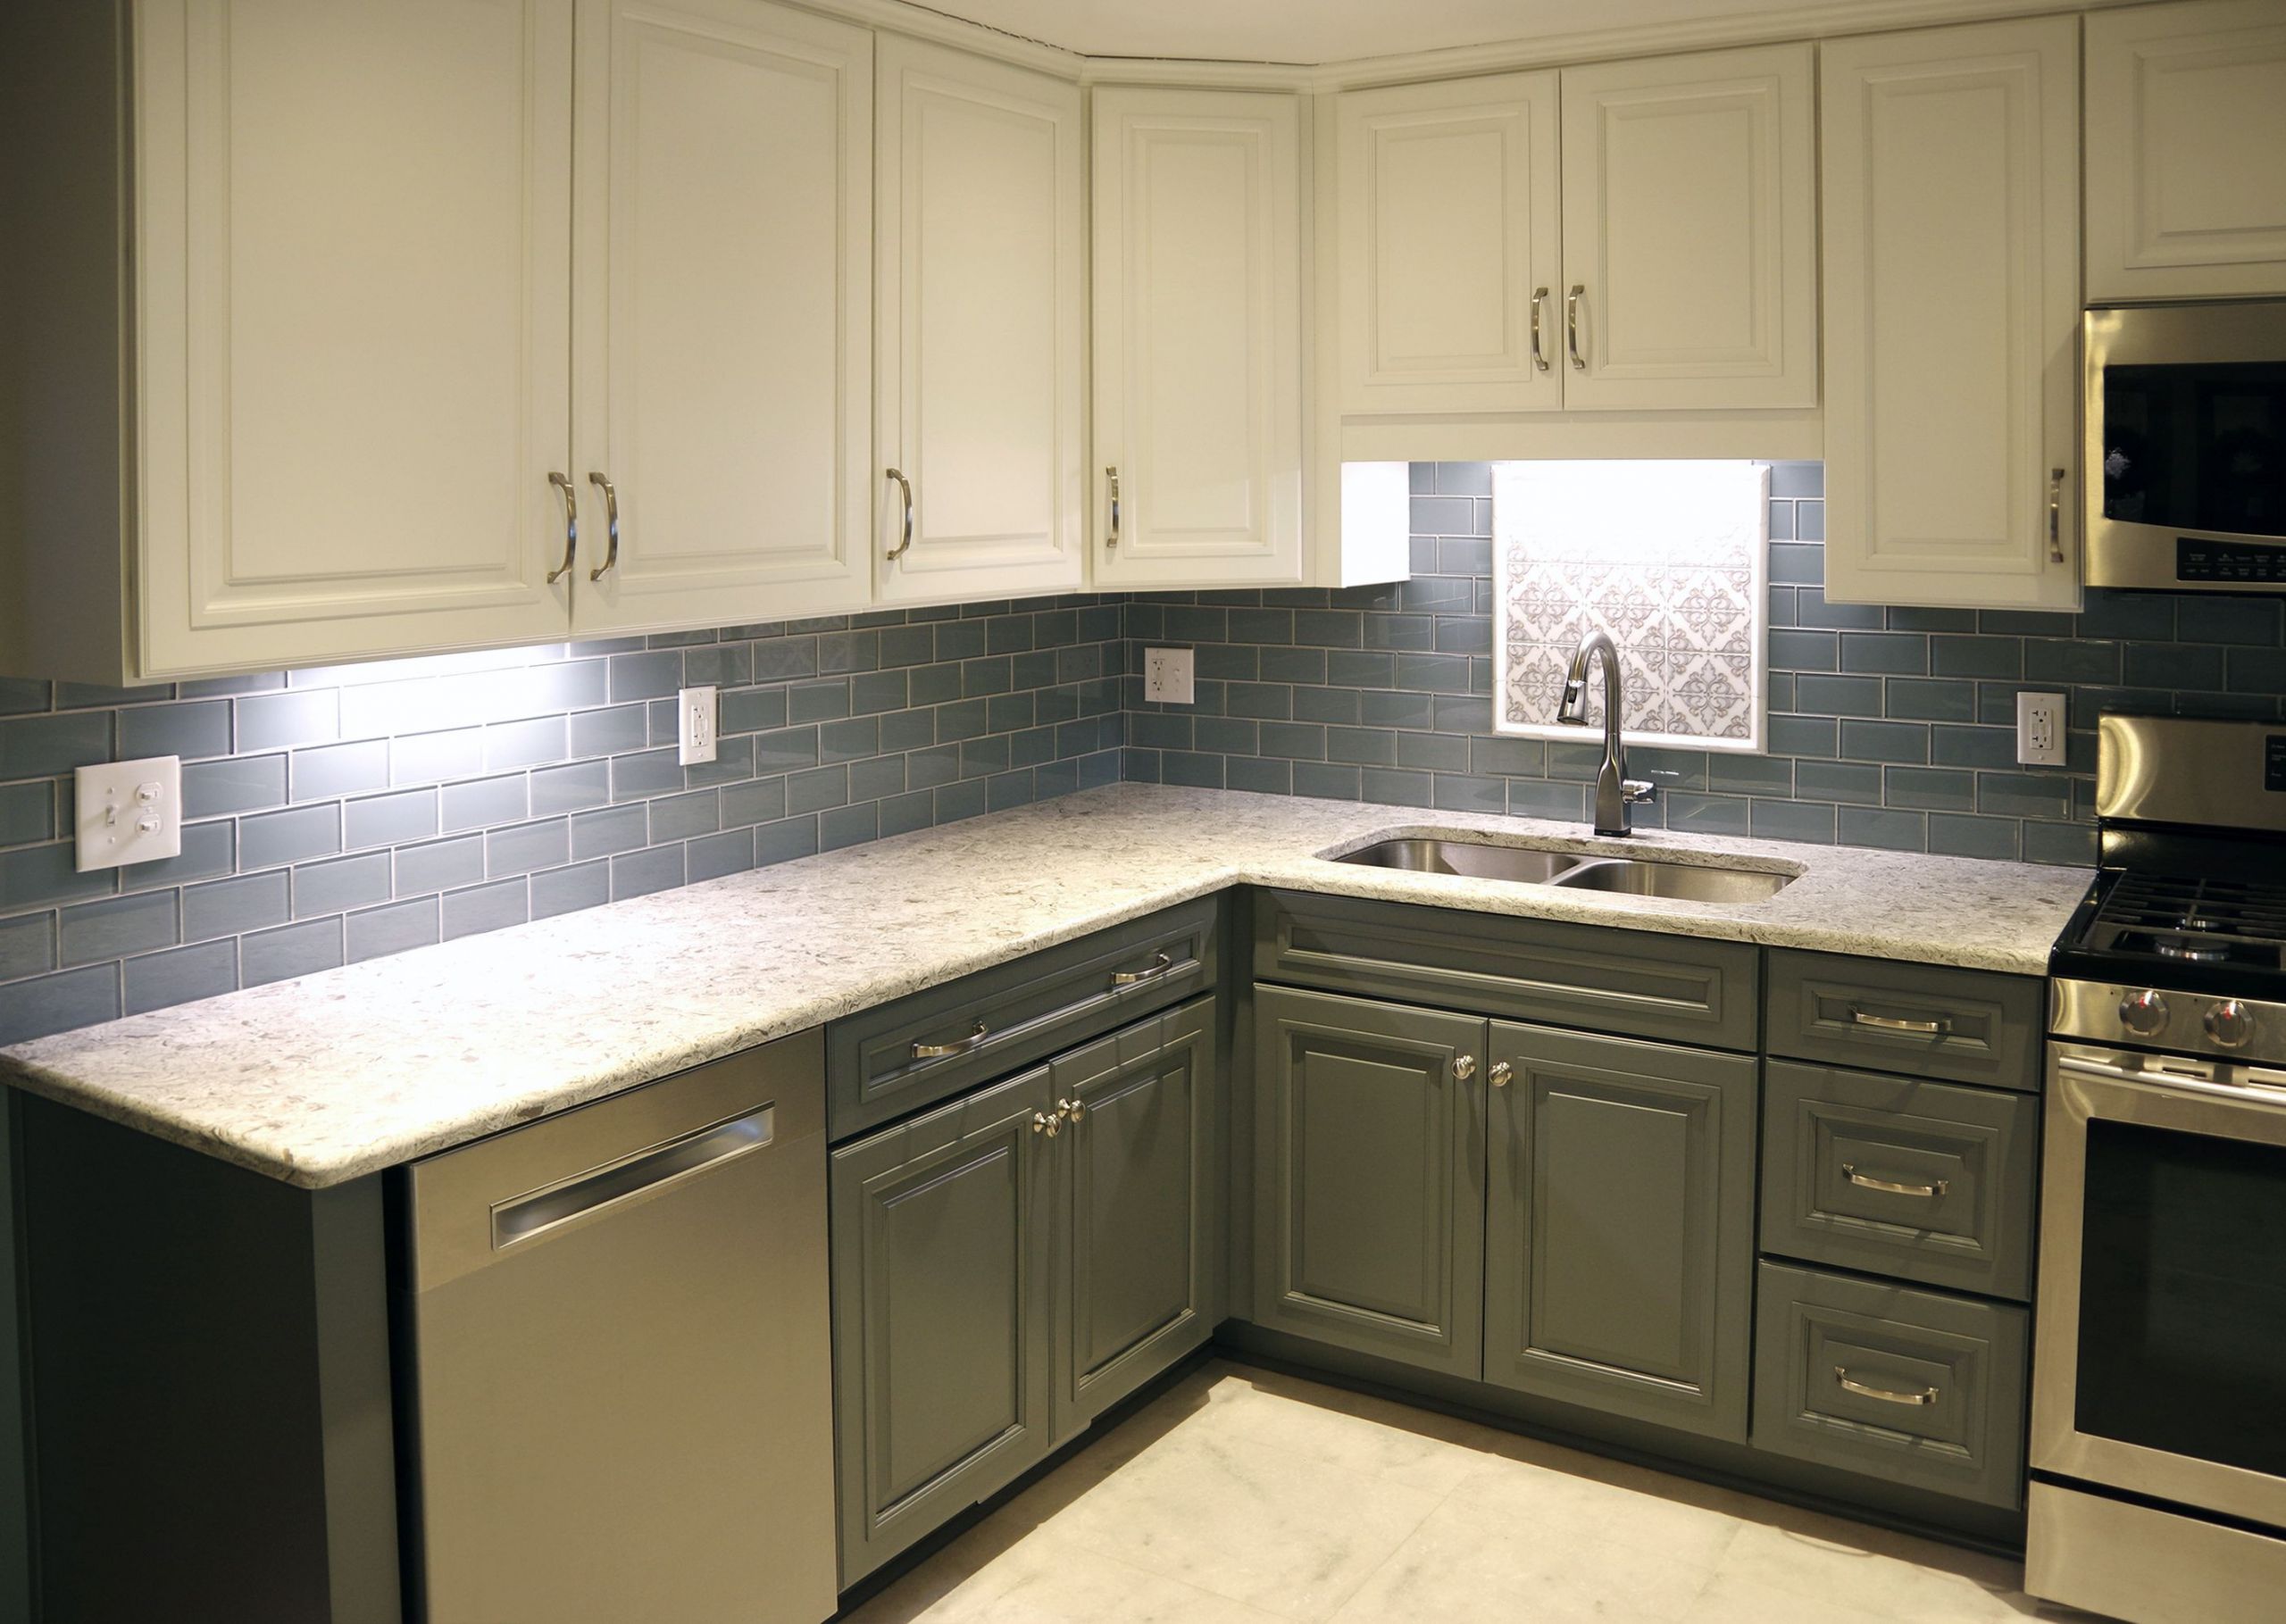 Kitchen Remodeling Pittsburgh
 This recent Pittsburgh kitchen remodel offers the perfect